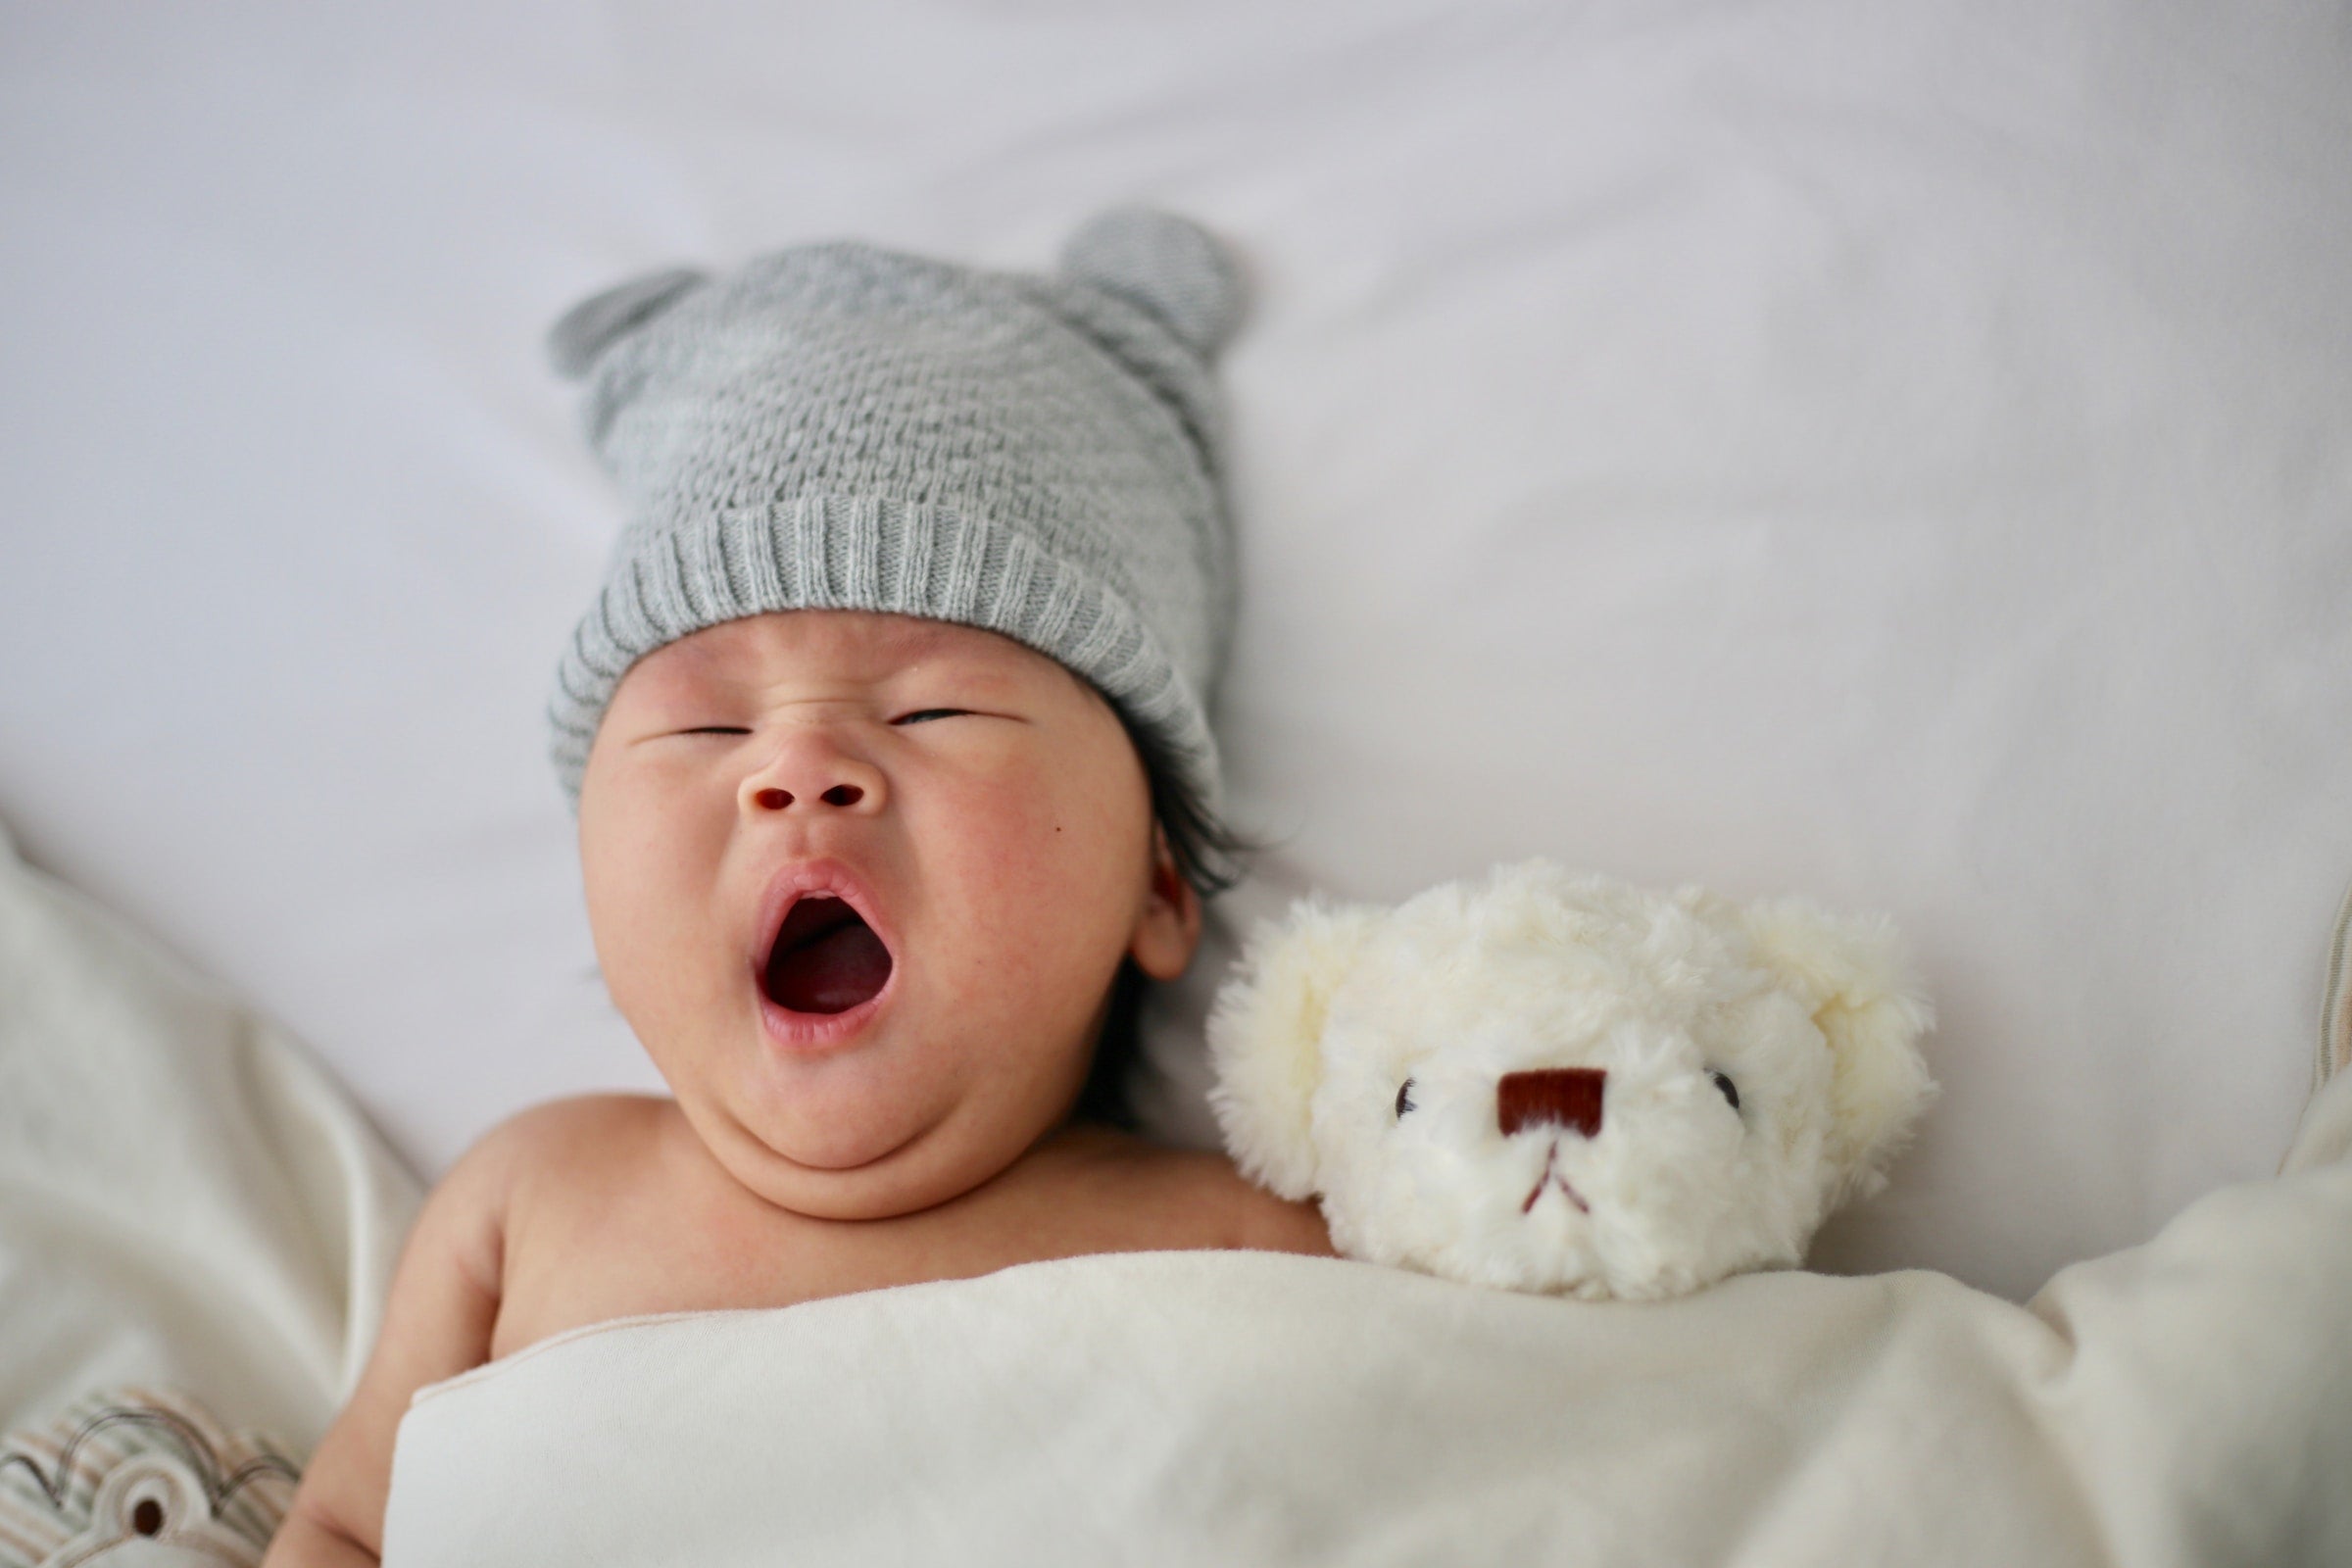 a baby with a grey knit cap yawning in bed next to his teddy bear